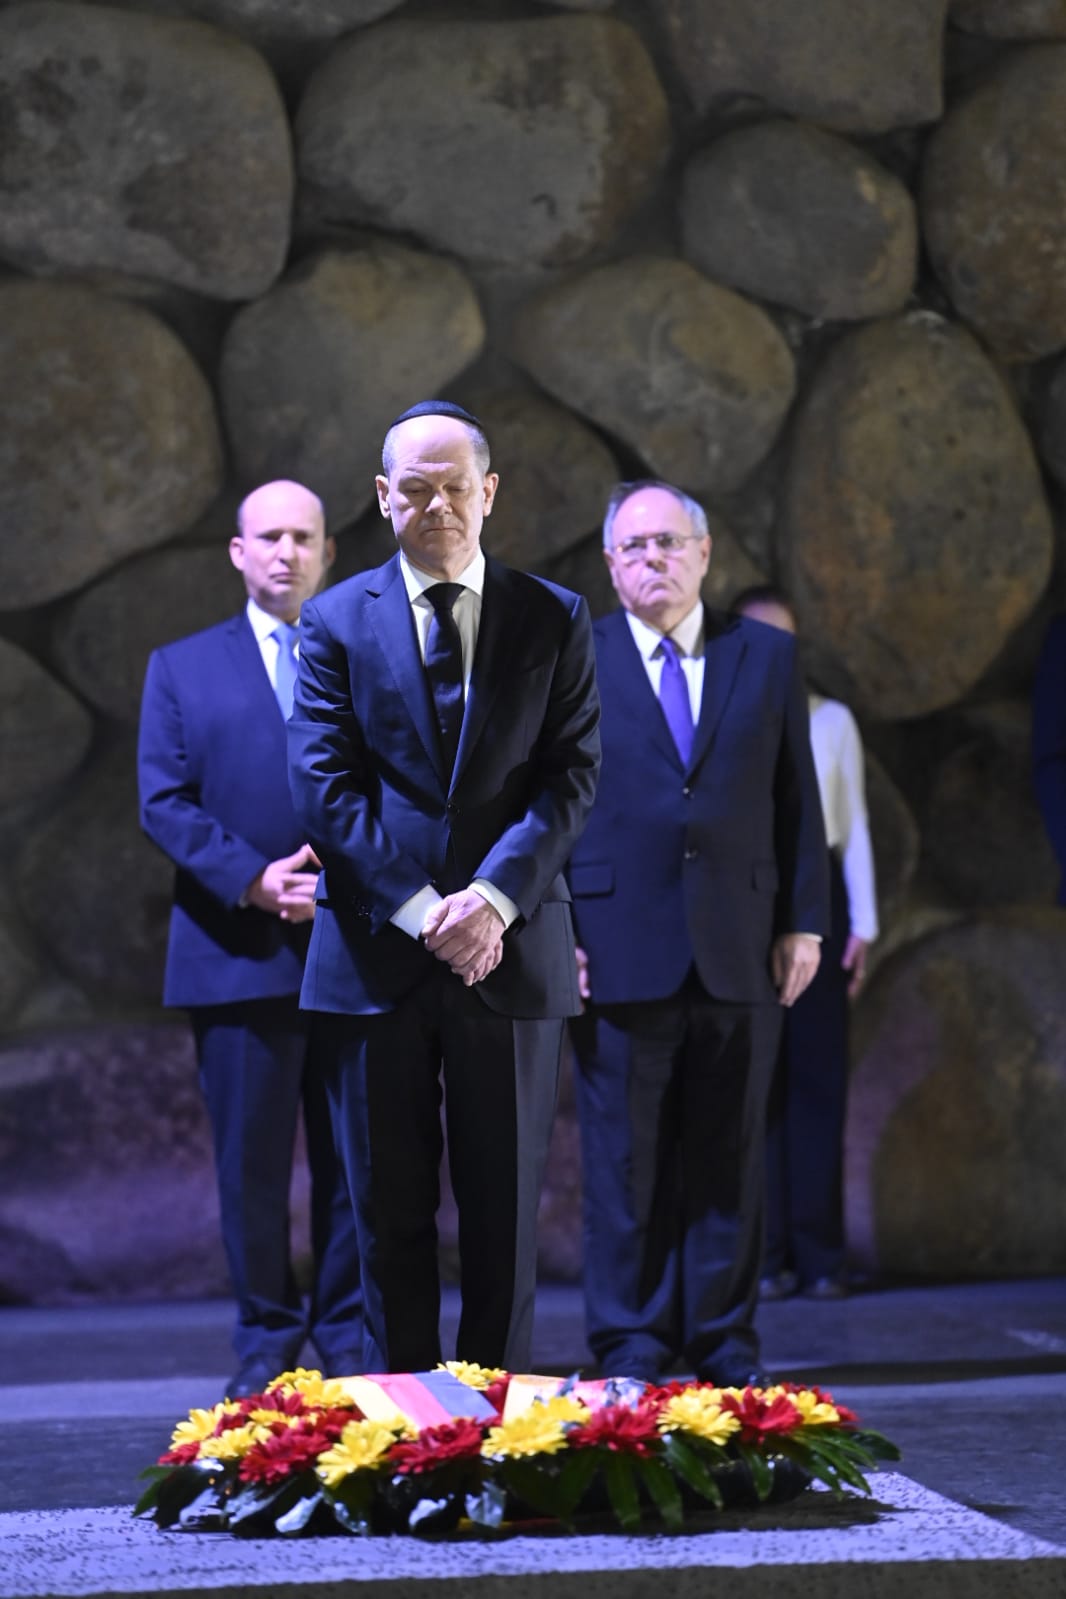 Germany's Chancellor Olaf Scholz paid respects to the six million Jewish men, women and children murdered during the Holocaust in Yad Vashem's Hall of Remembrance